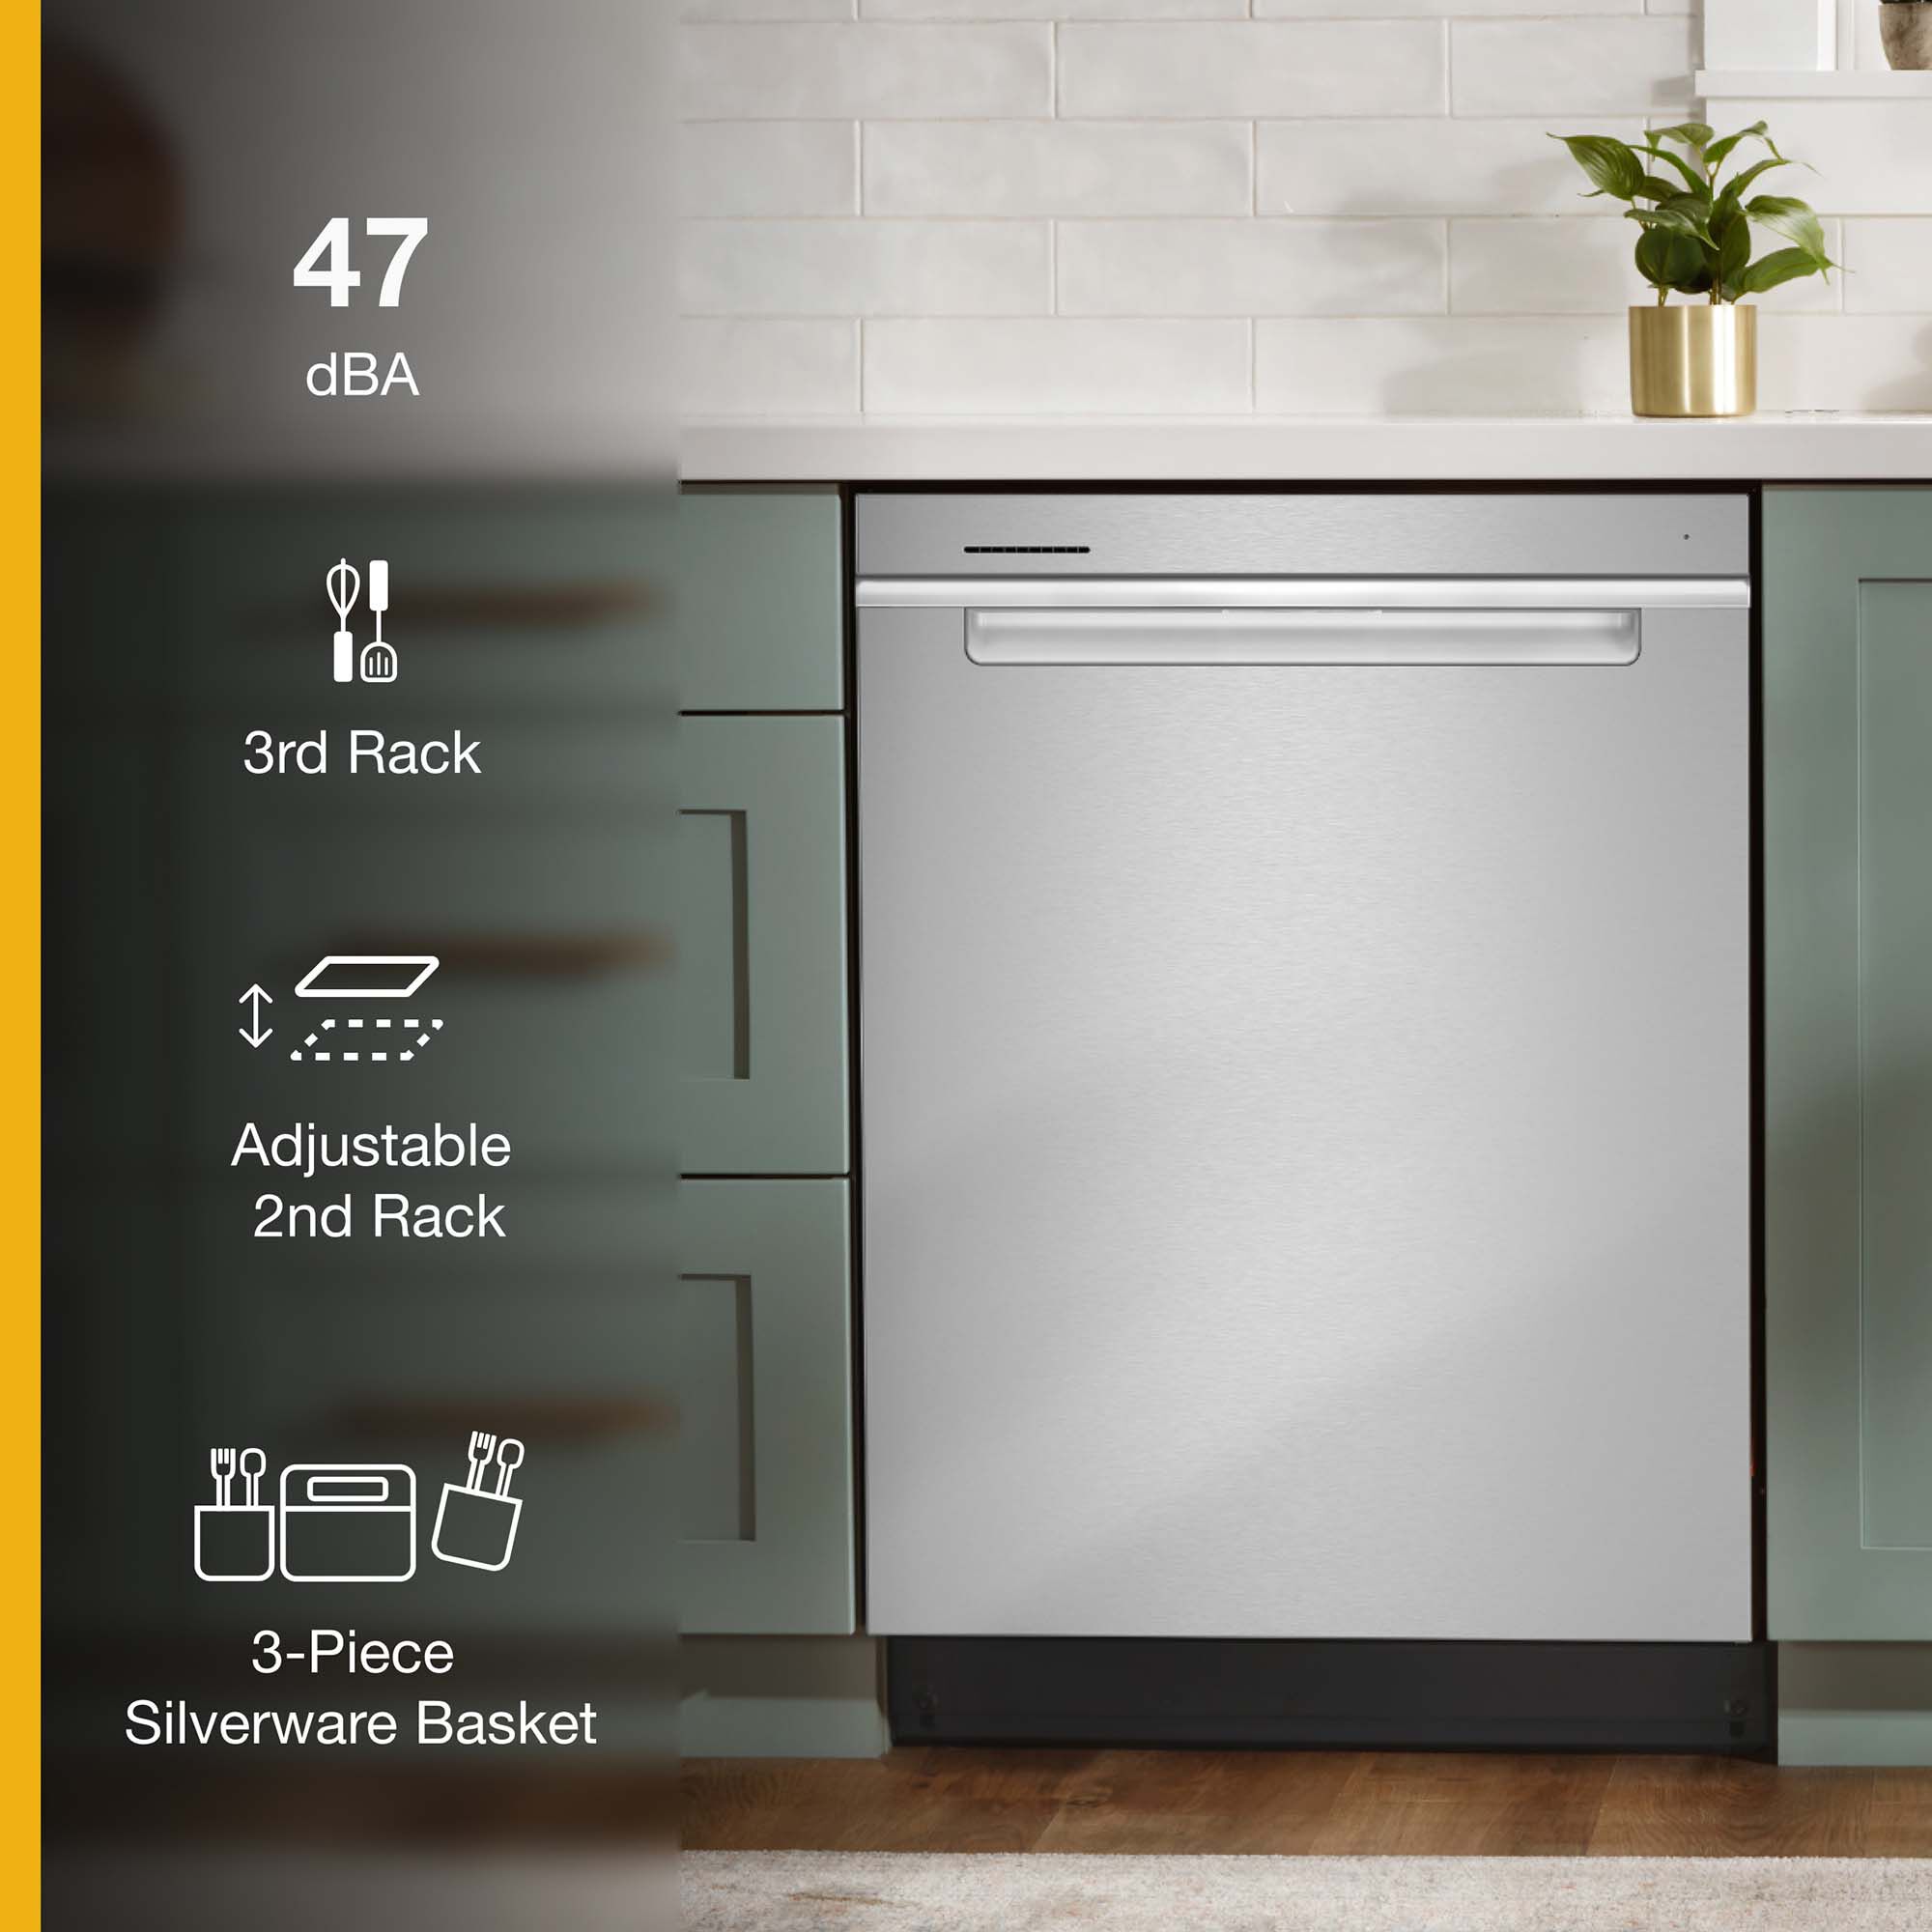 Whirlpool 24 in. Built-In Dishwasher with Top Control, 47 dBA 